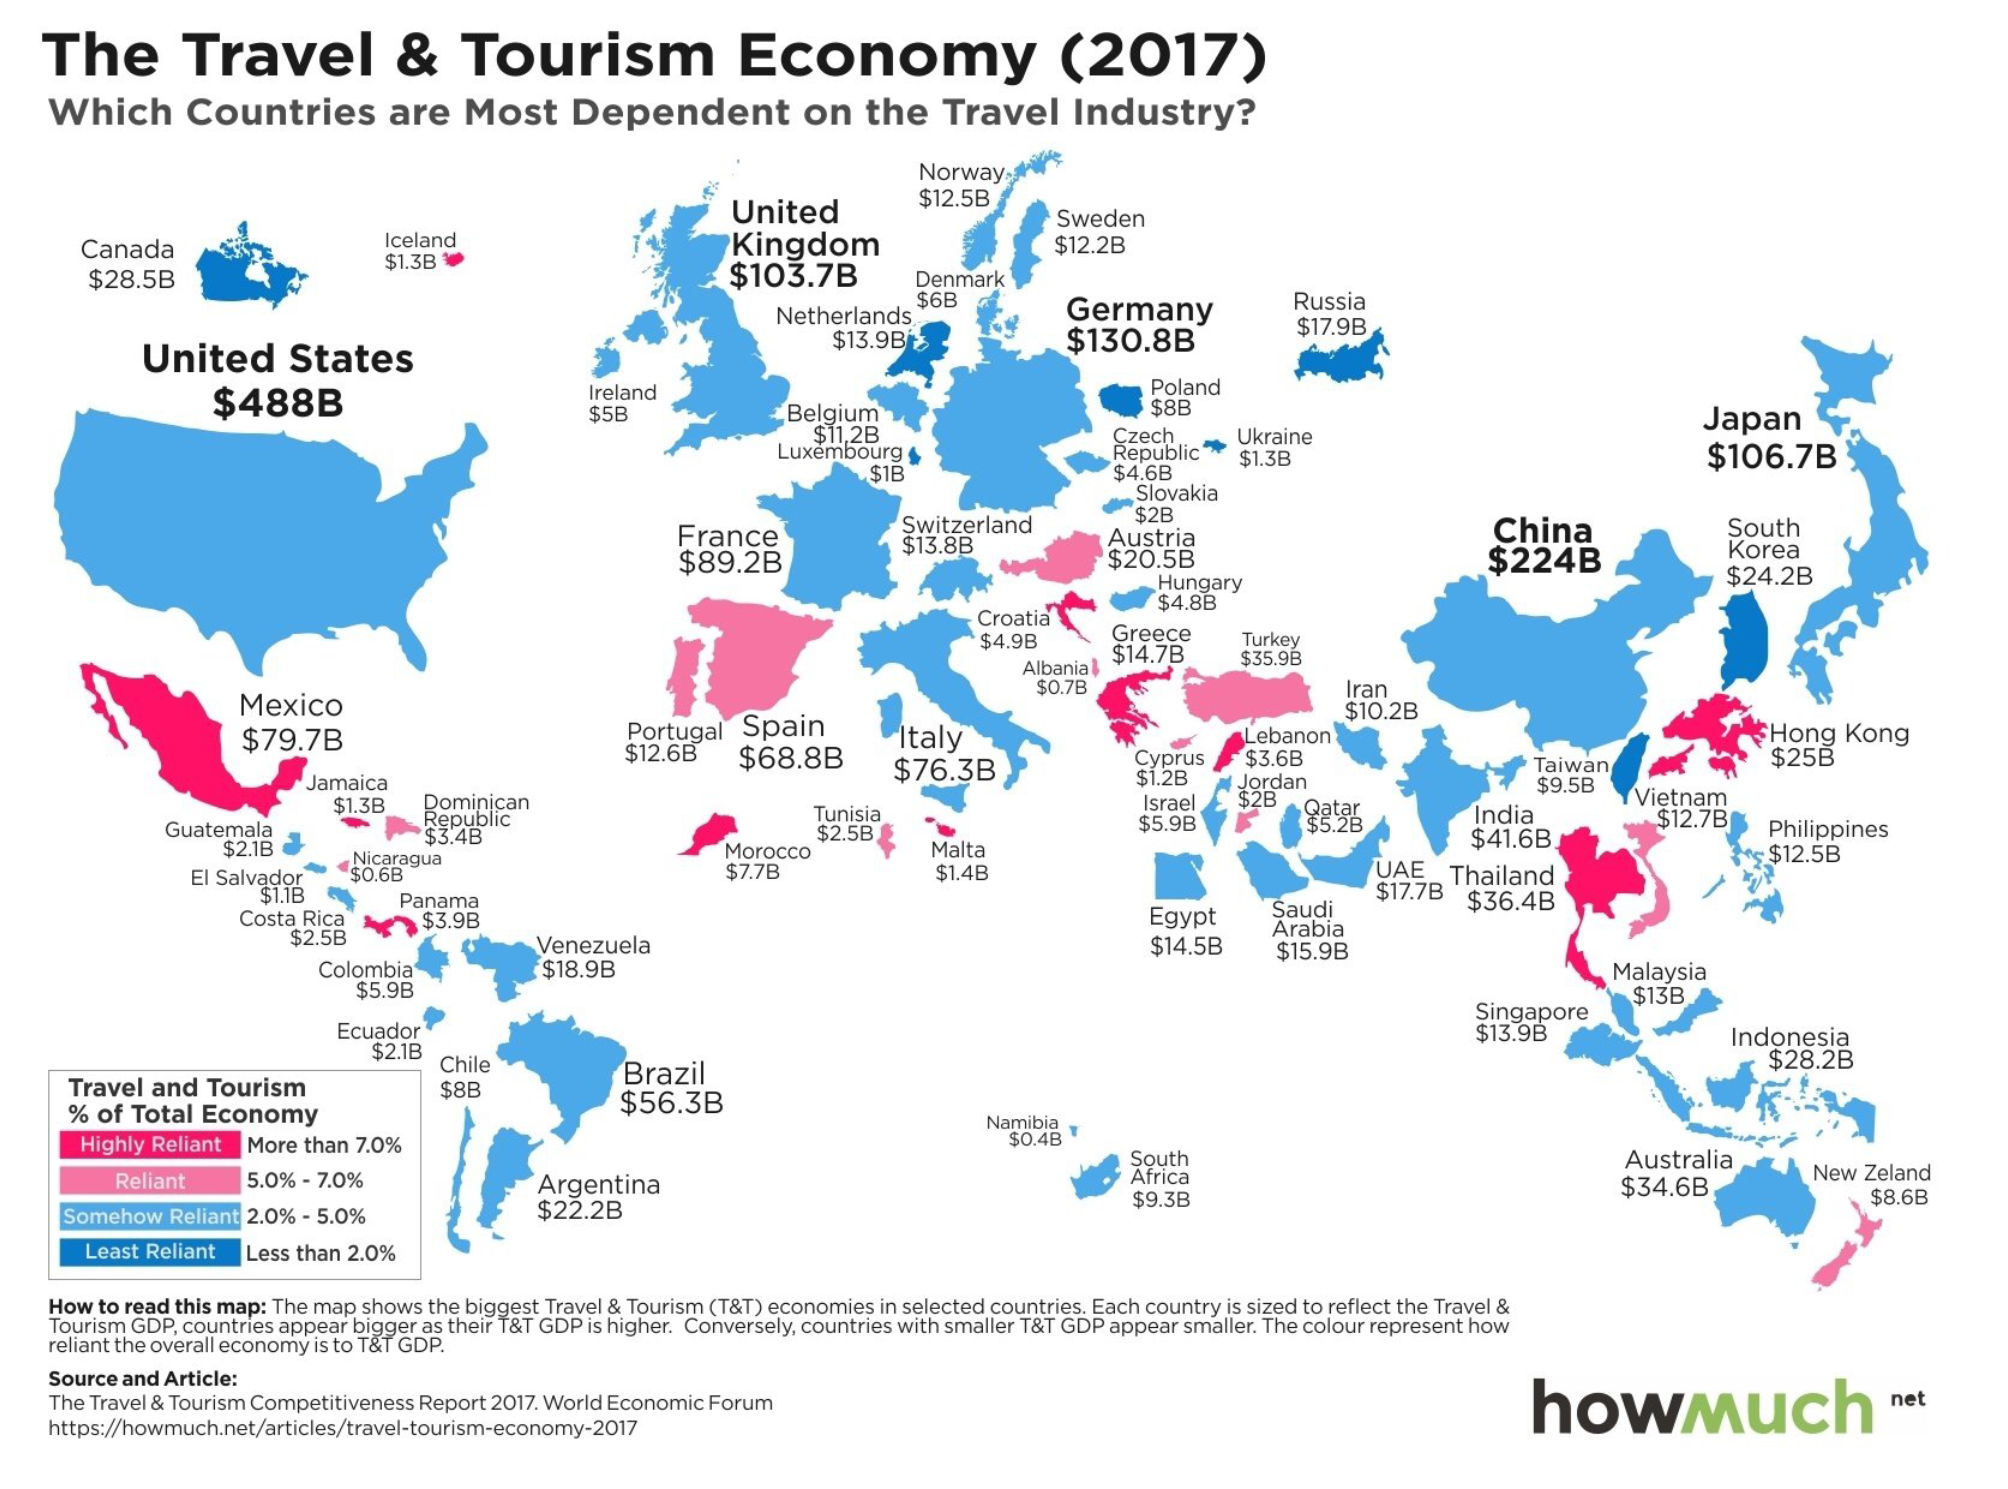 Thailand's economy depends mostly on tourism, which is at an all time low